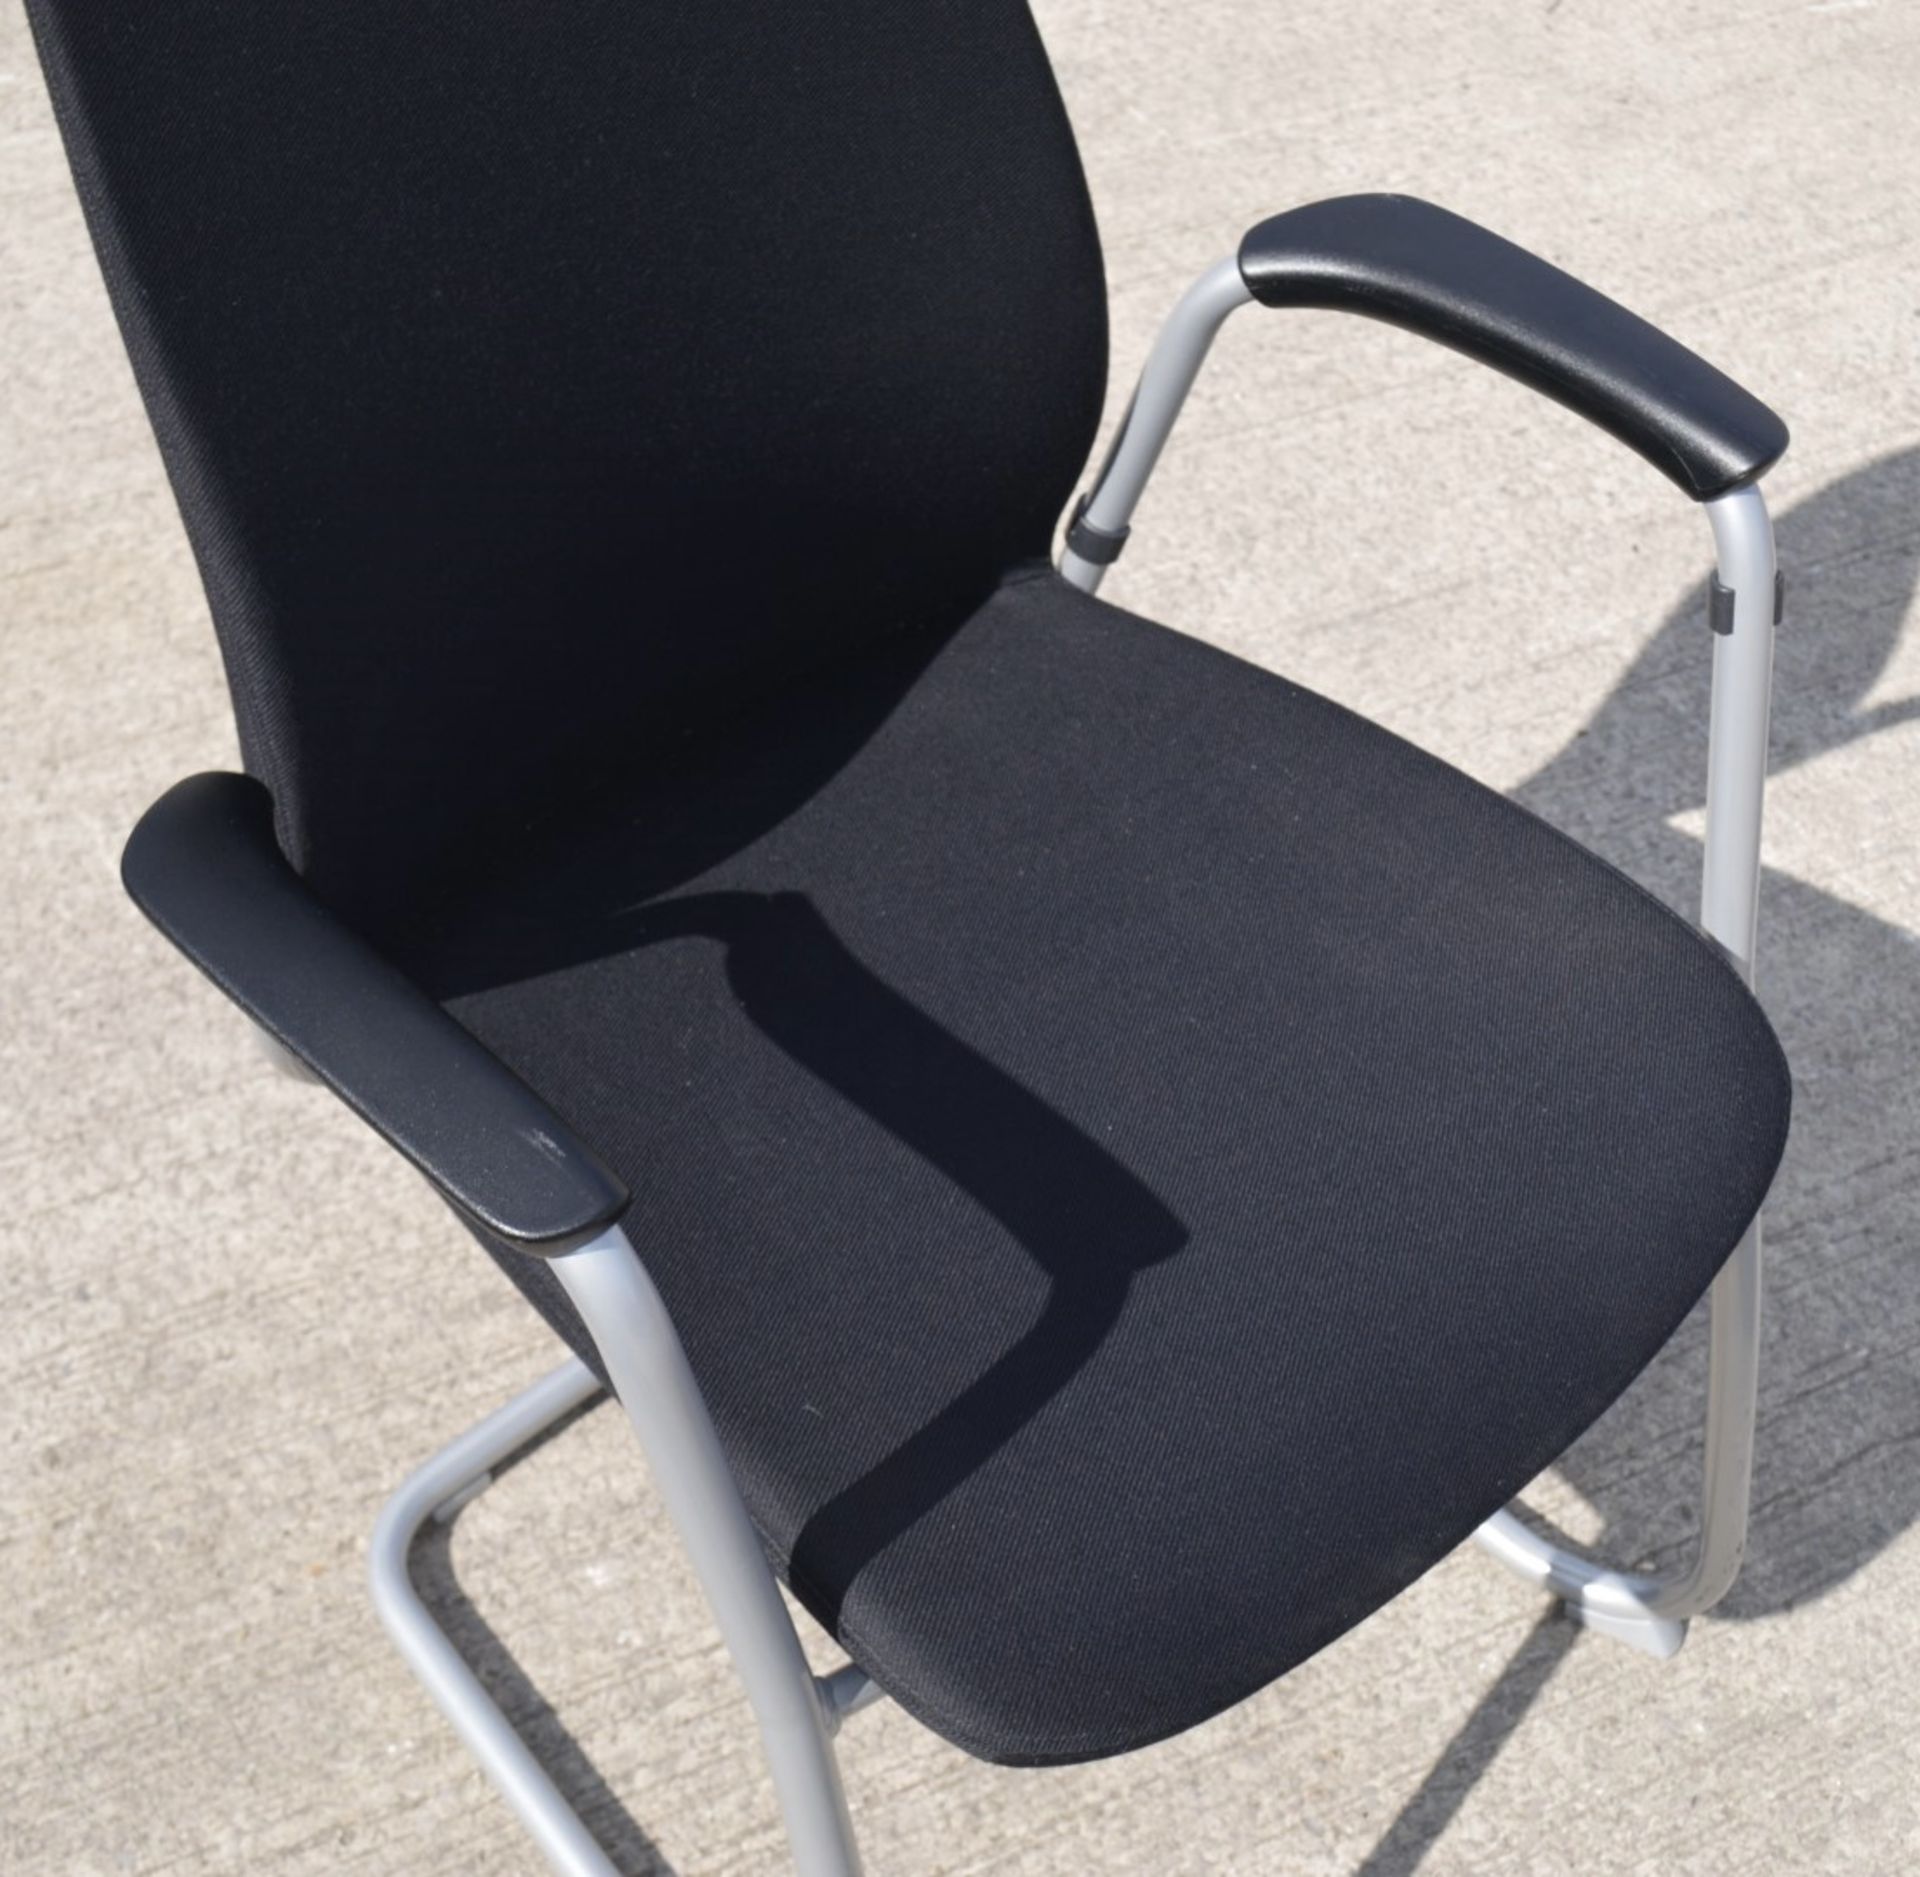 4 x Kinnarps 5000CV Meeting Chairs In Black - Dimensions: W59 x H92 x D53, Seat 45cm - Made In - Image 5 of 7